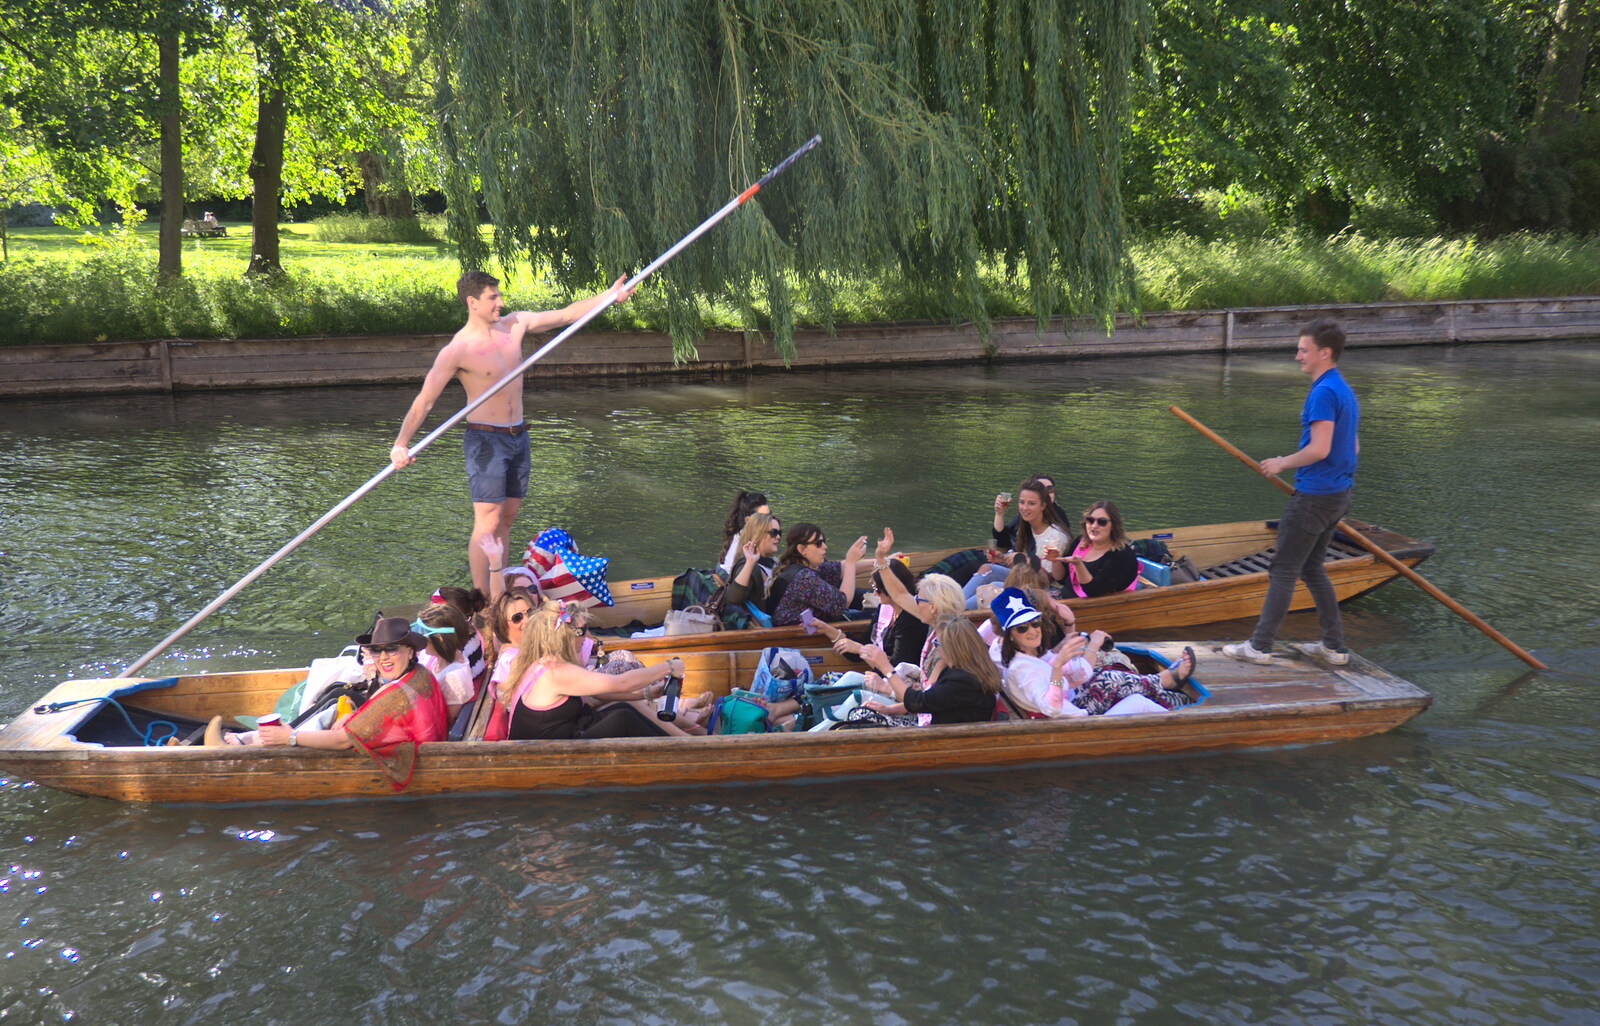 The Cam is full of Hen parties from Punting With Grandad, Cambridge, Cambridgeshire - 6th June 2015